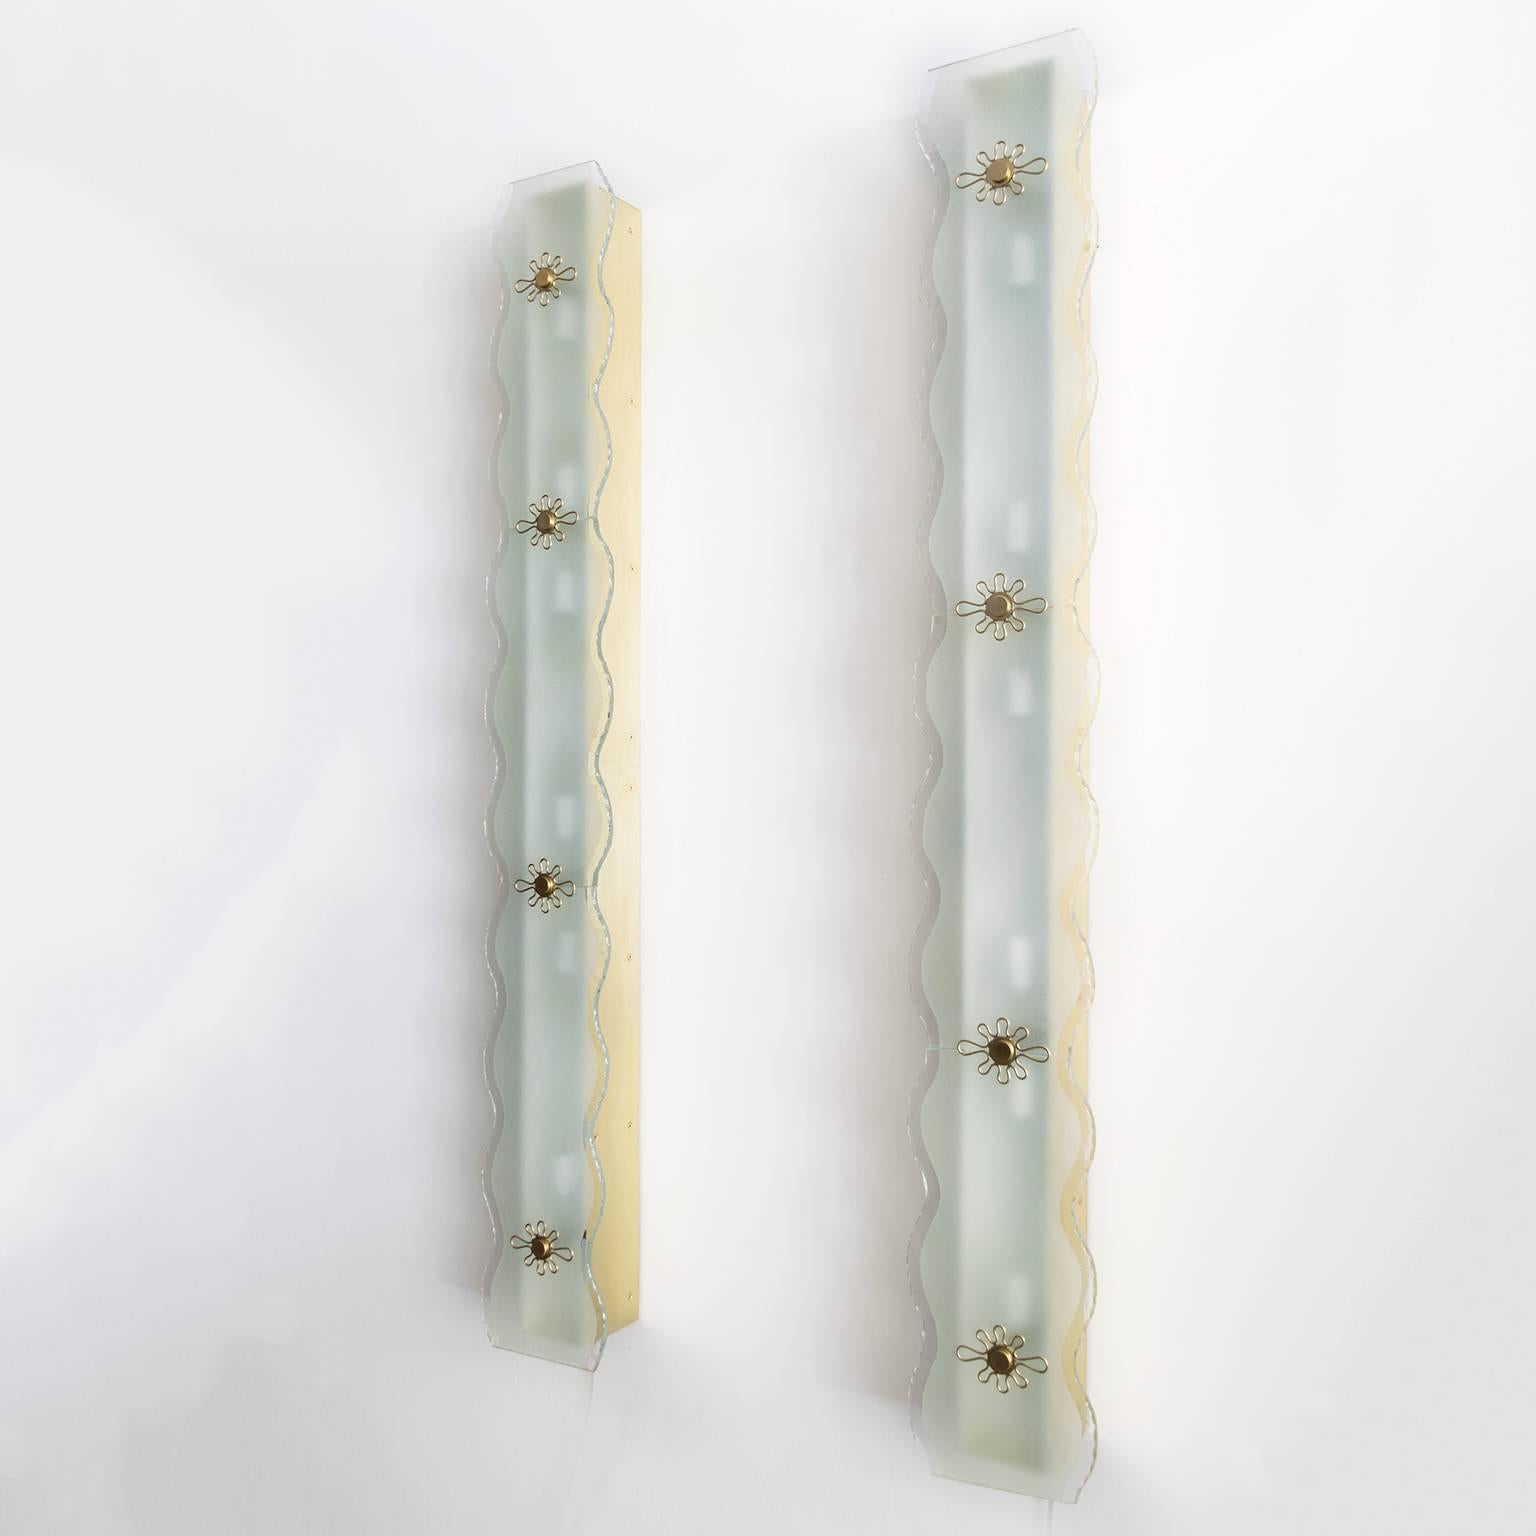 One of two large pairs of Scandinavian Modern wall lamps / flush mount fixtures veneered with brass panels. Each lamp has textured glass plates with scalloped edges and partial frosted areas. Decorative polished solid brass details hold glass in